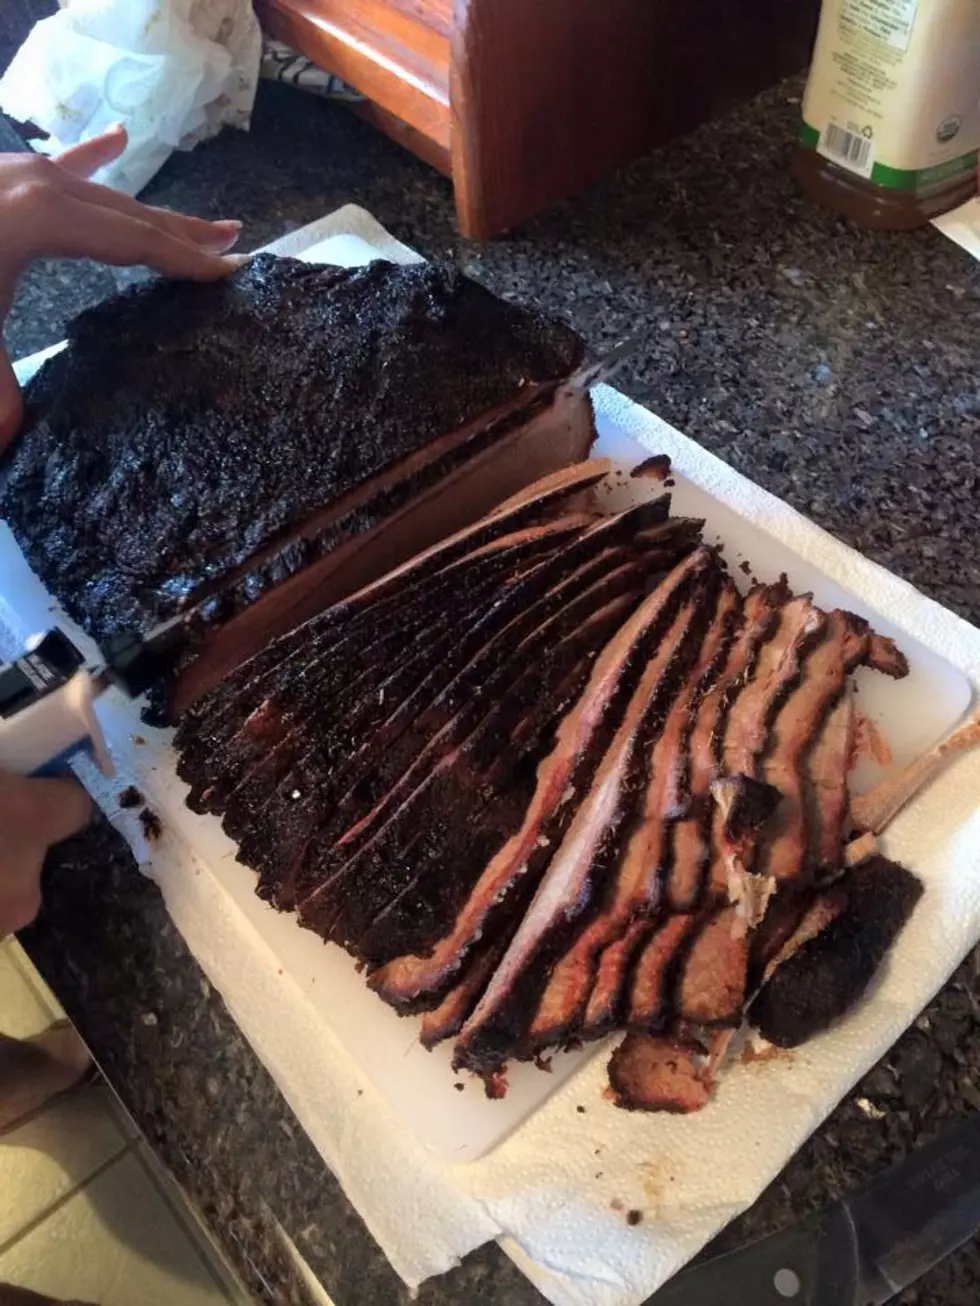 Texas A&M Researchers Say Brisket Is Healthy For You